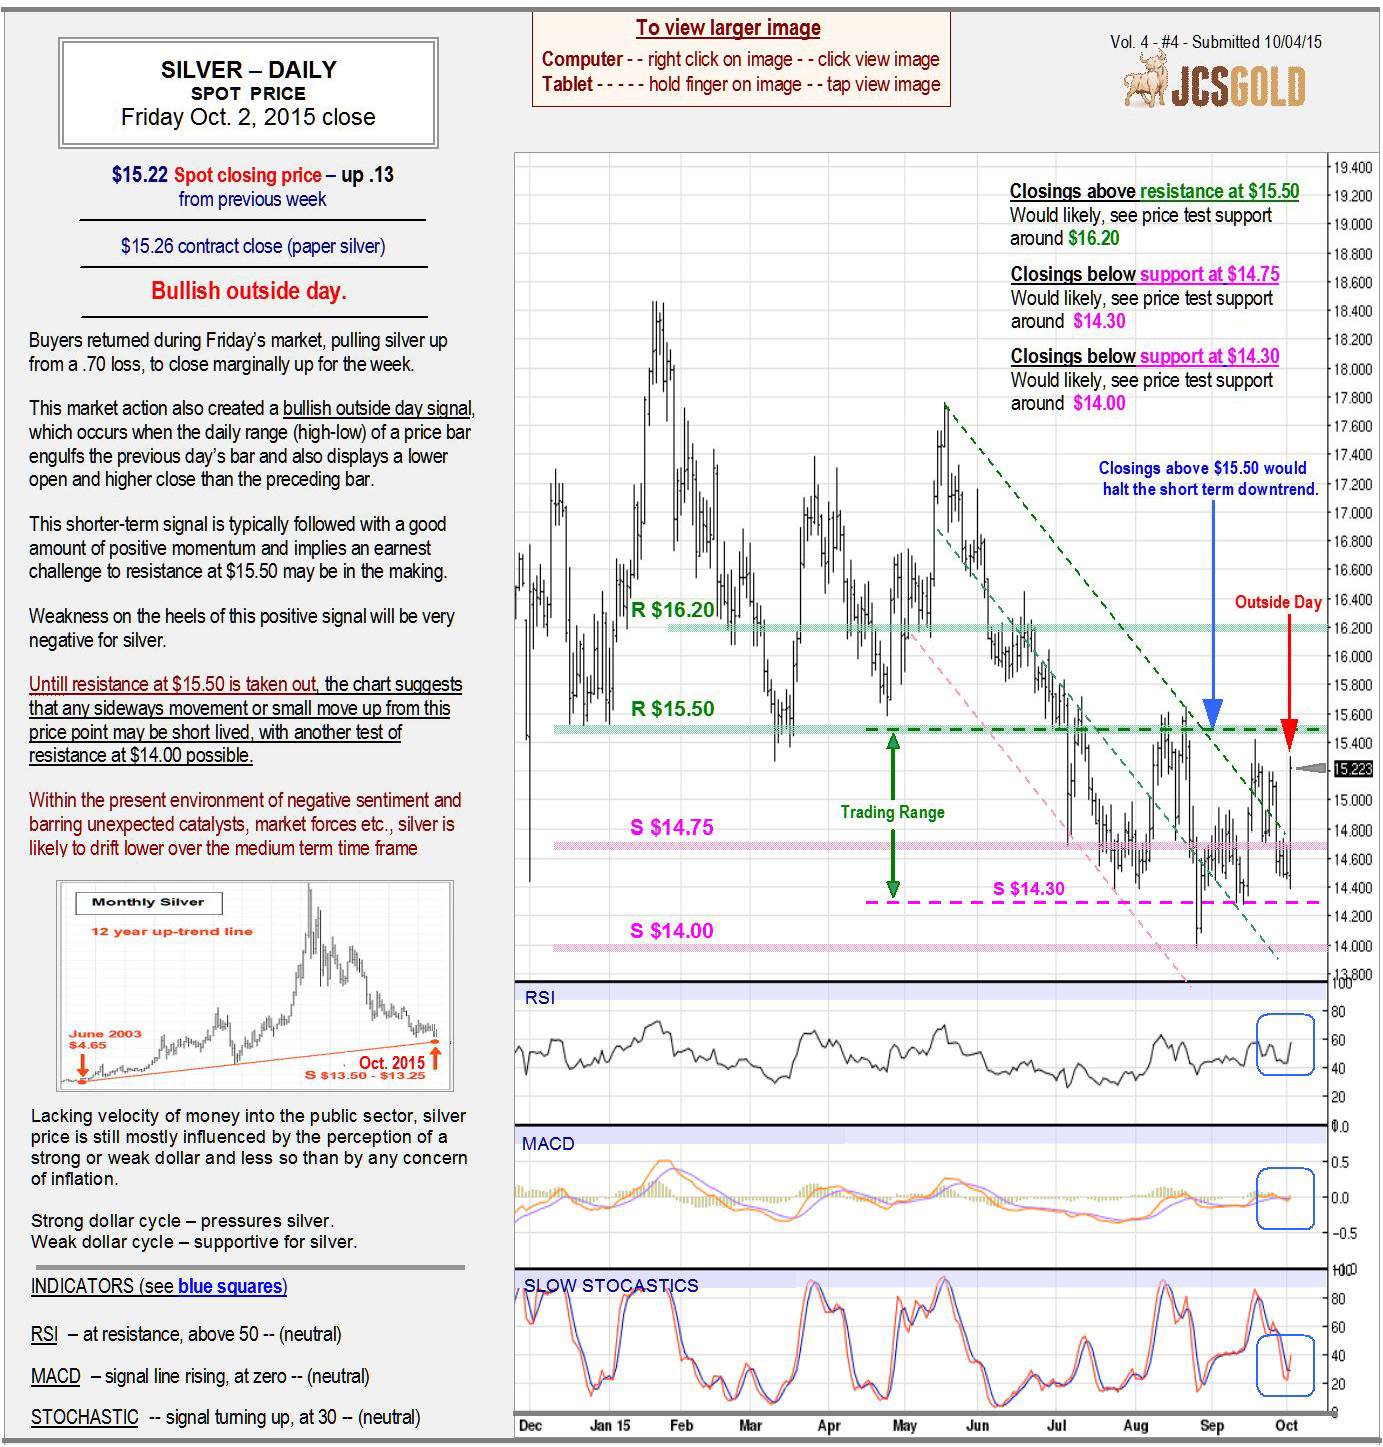 Oct 2, 2015 chart & commentary